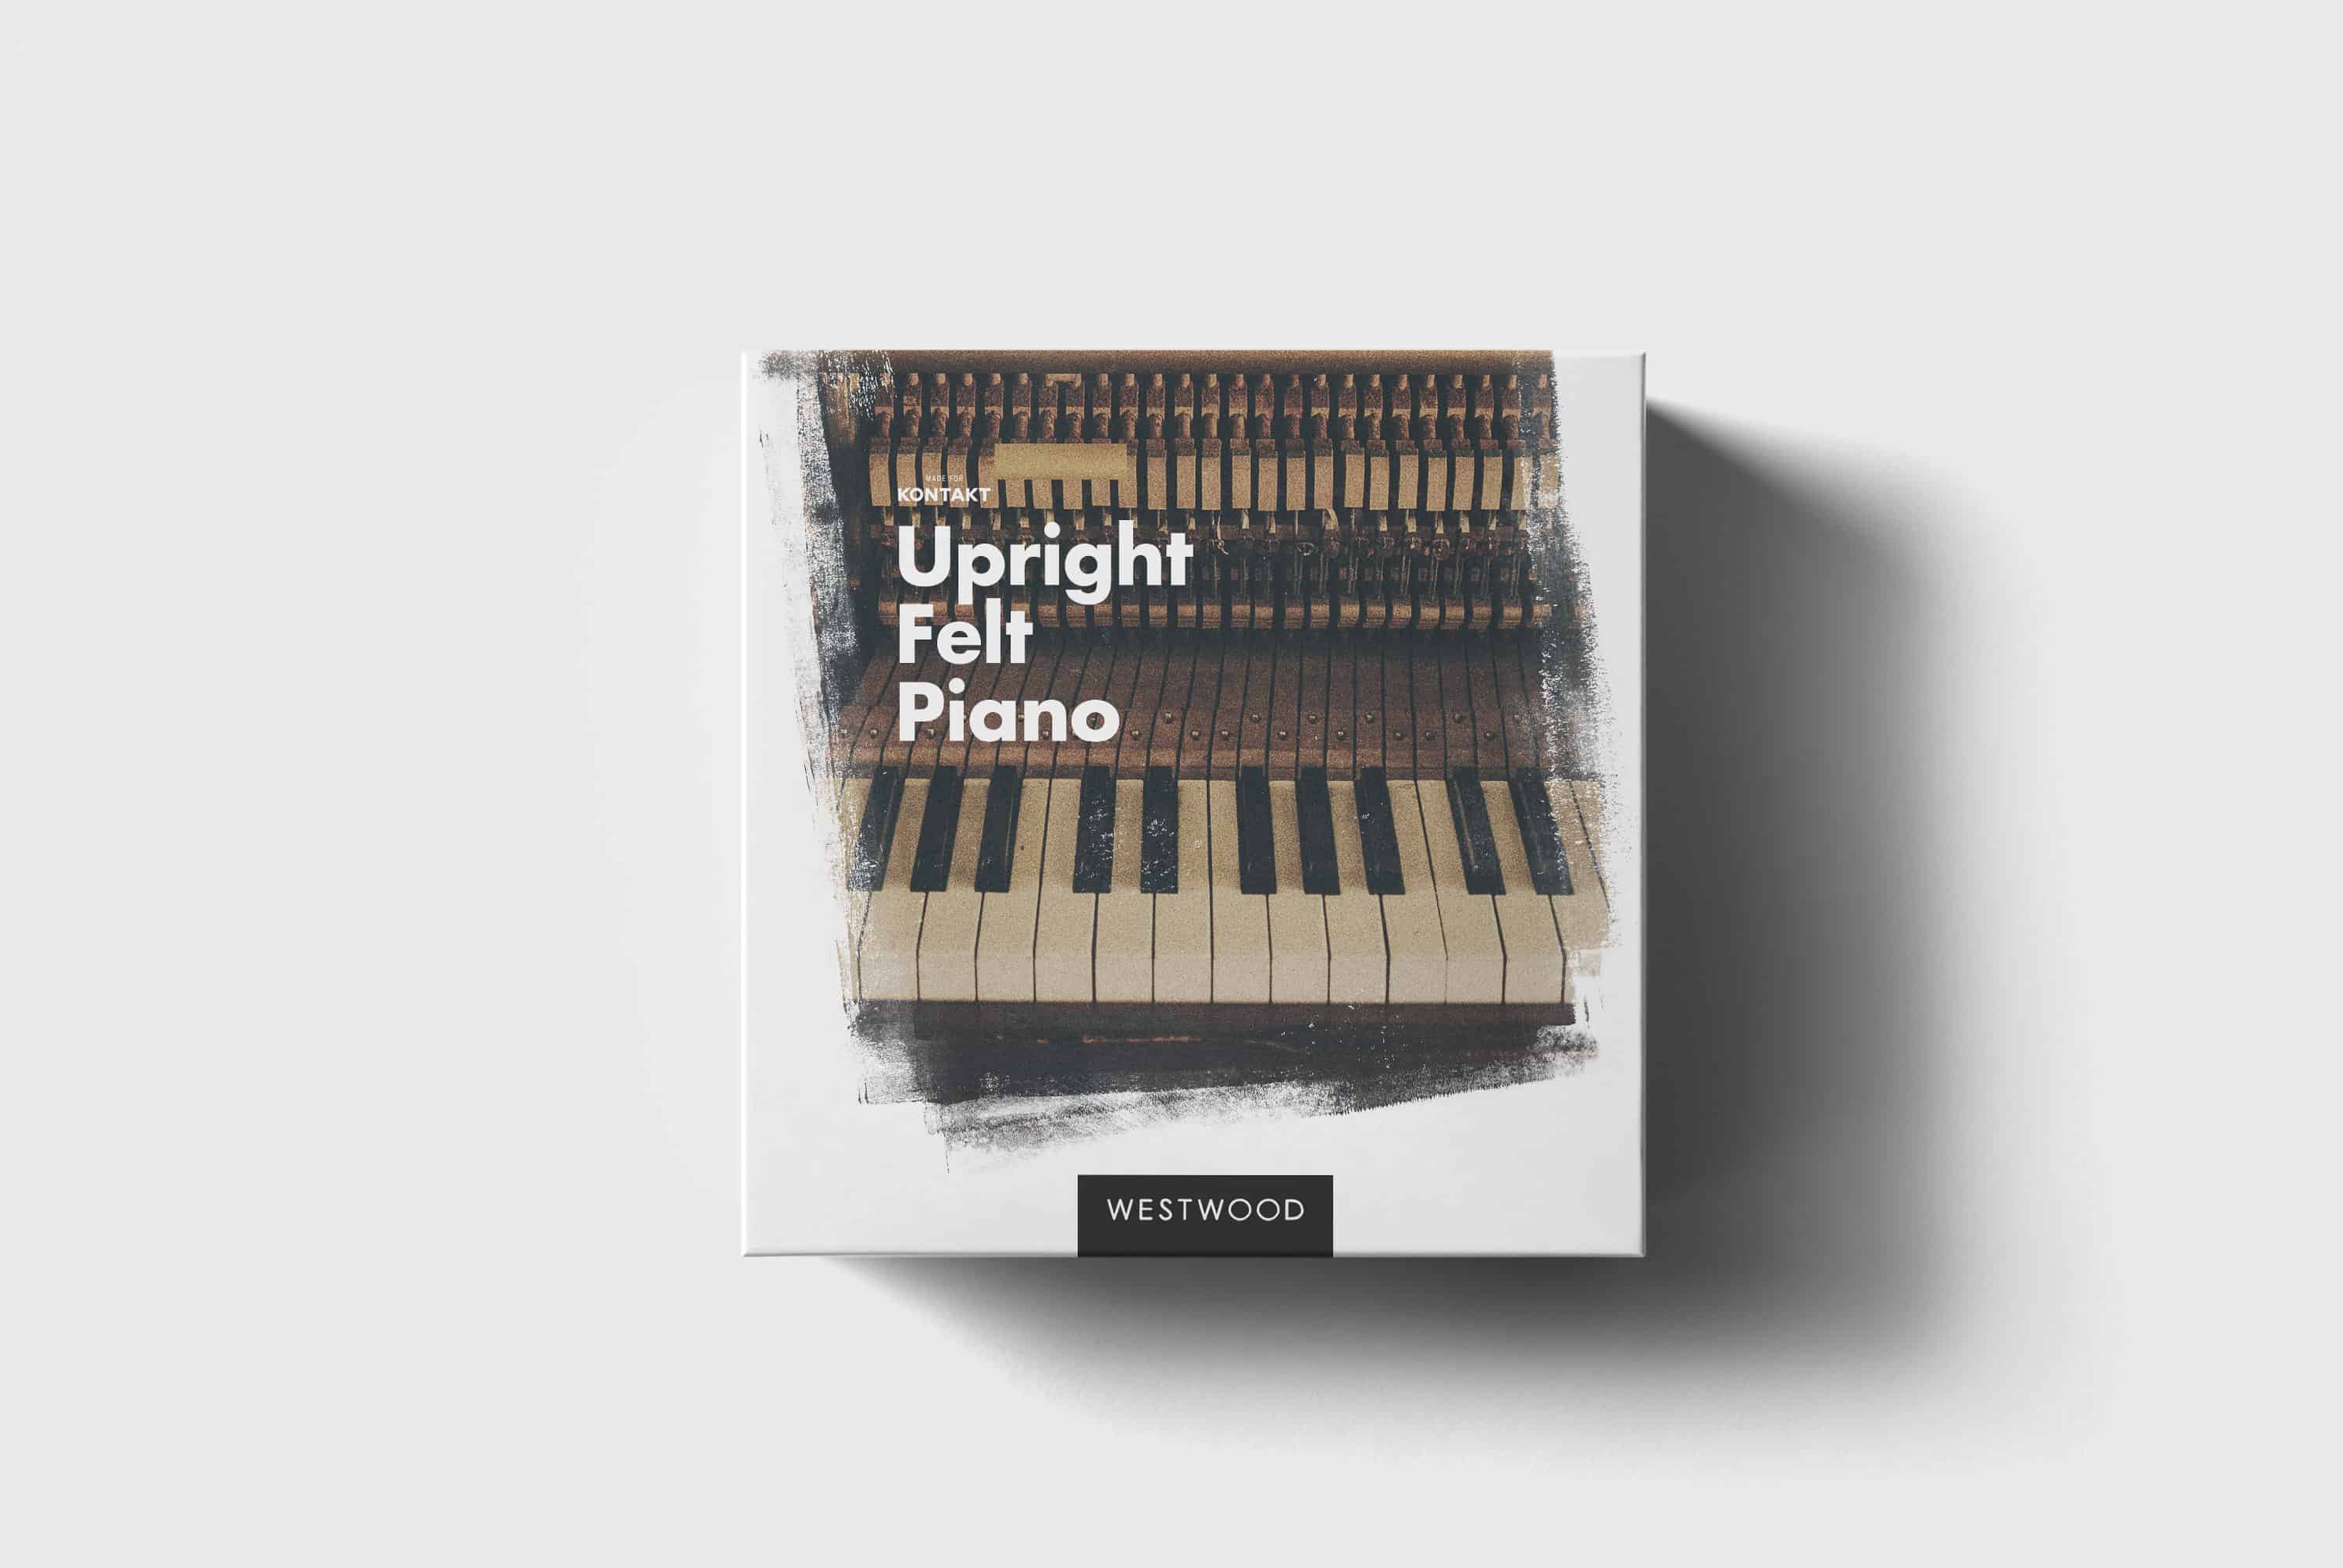 Upright Felt Piano by Westwood Instruments